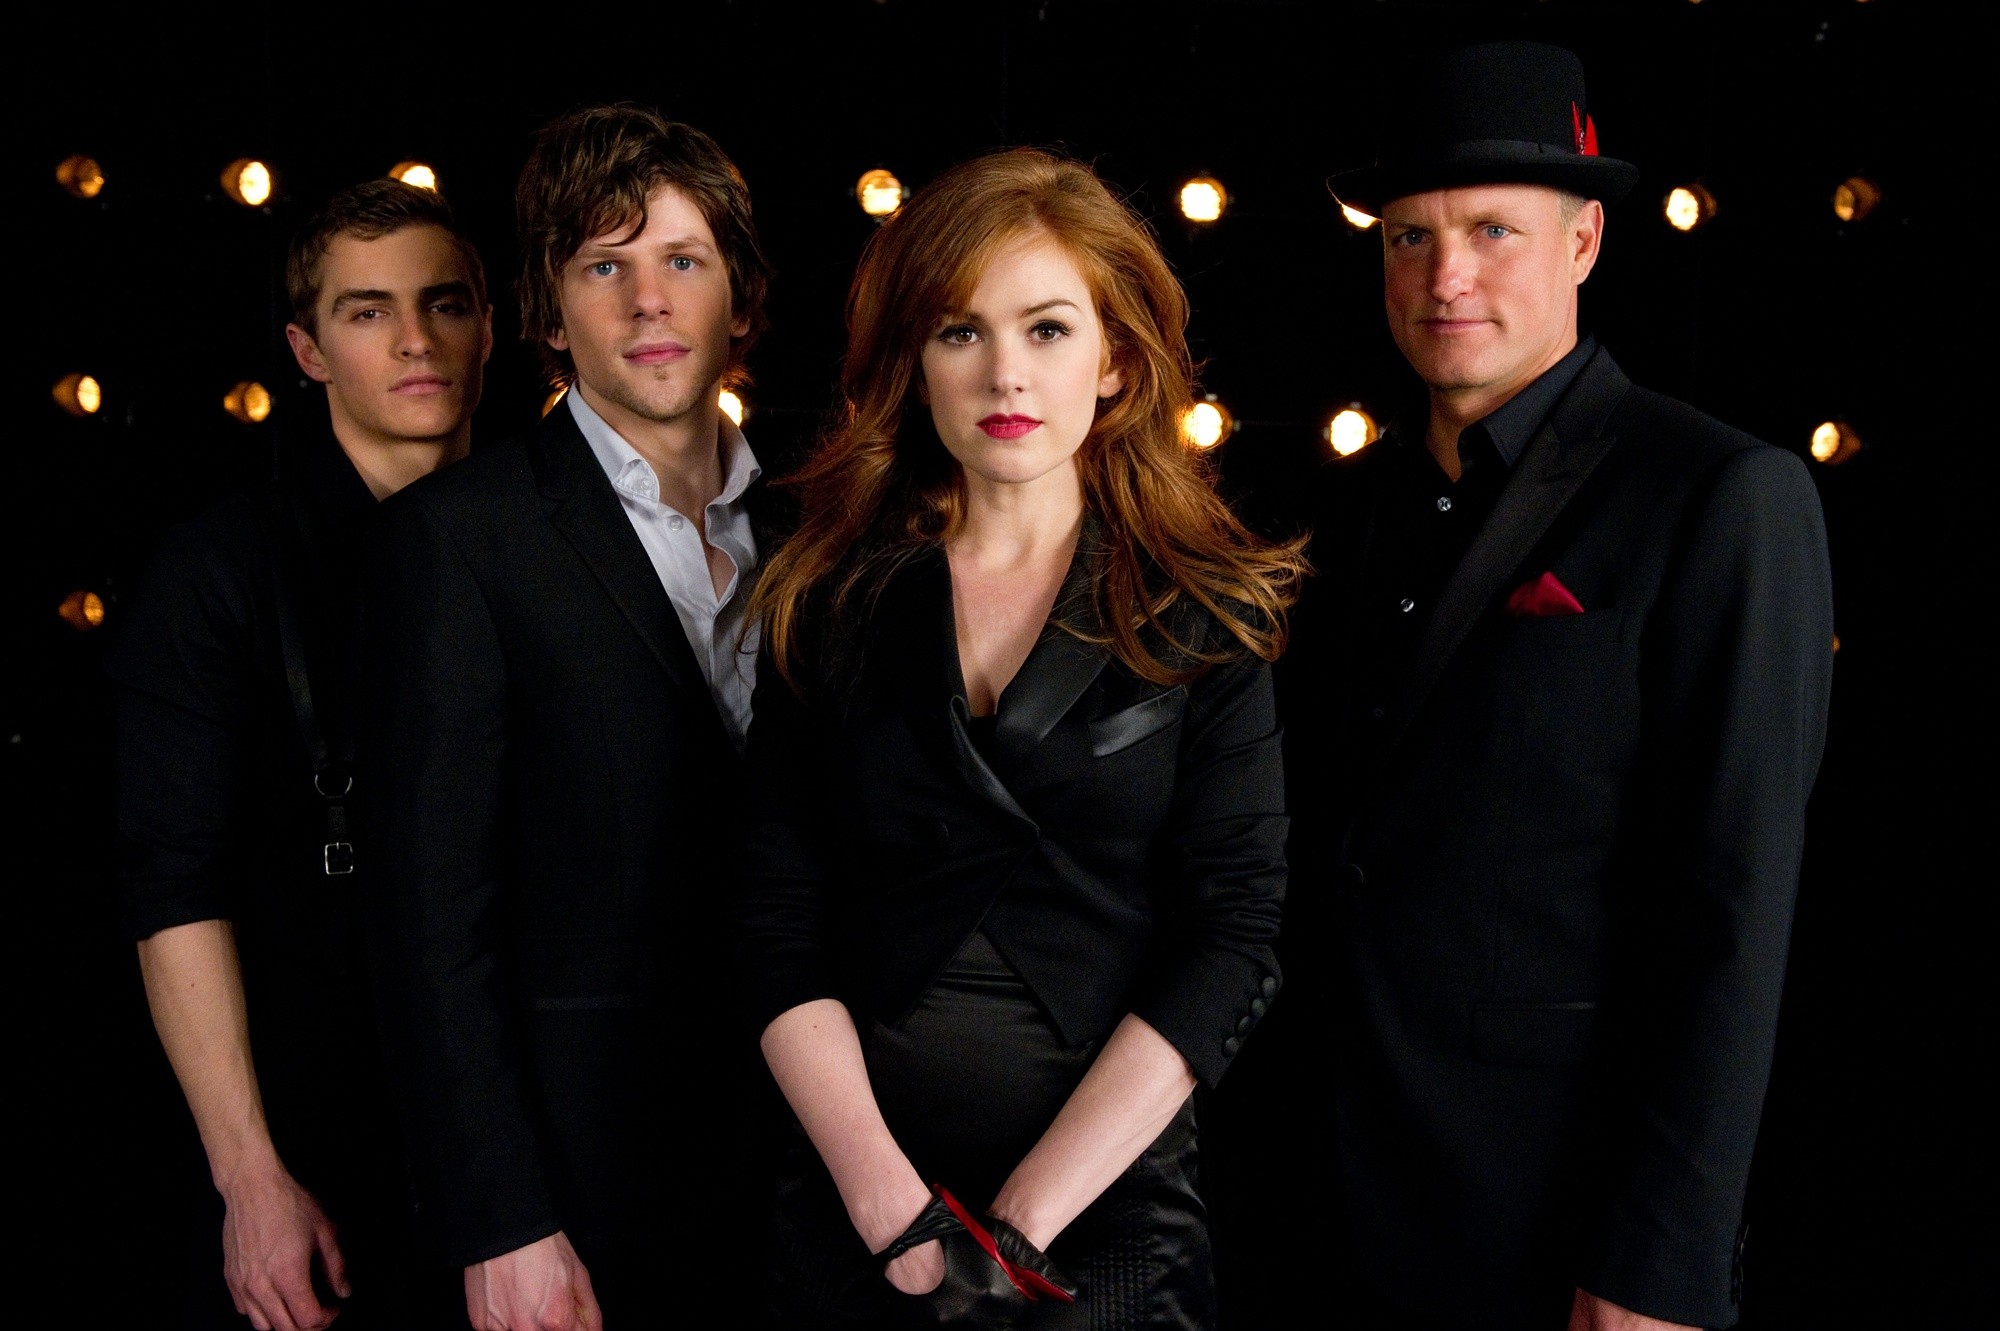 Dave Franco, Jesse Eisenberg, Isla Fisher and Woody Harrelson in Summit Entertainment's Now You See Me (2013)